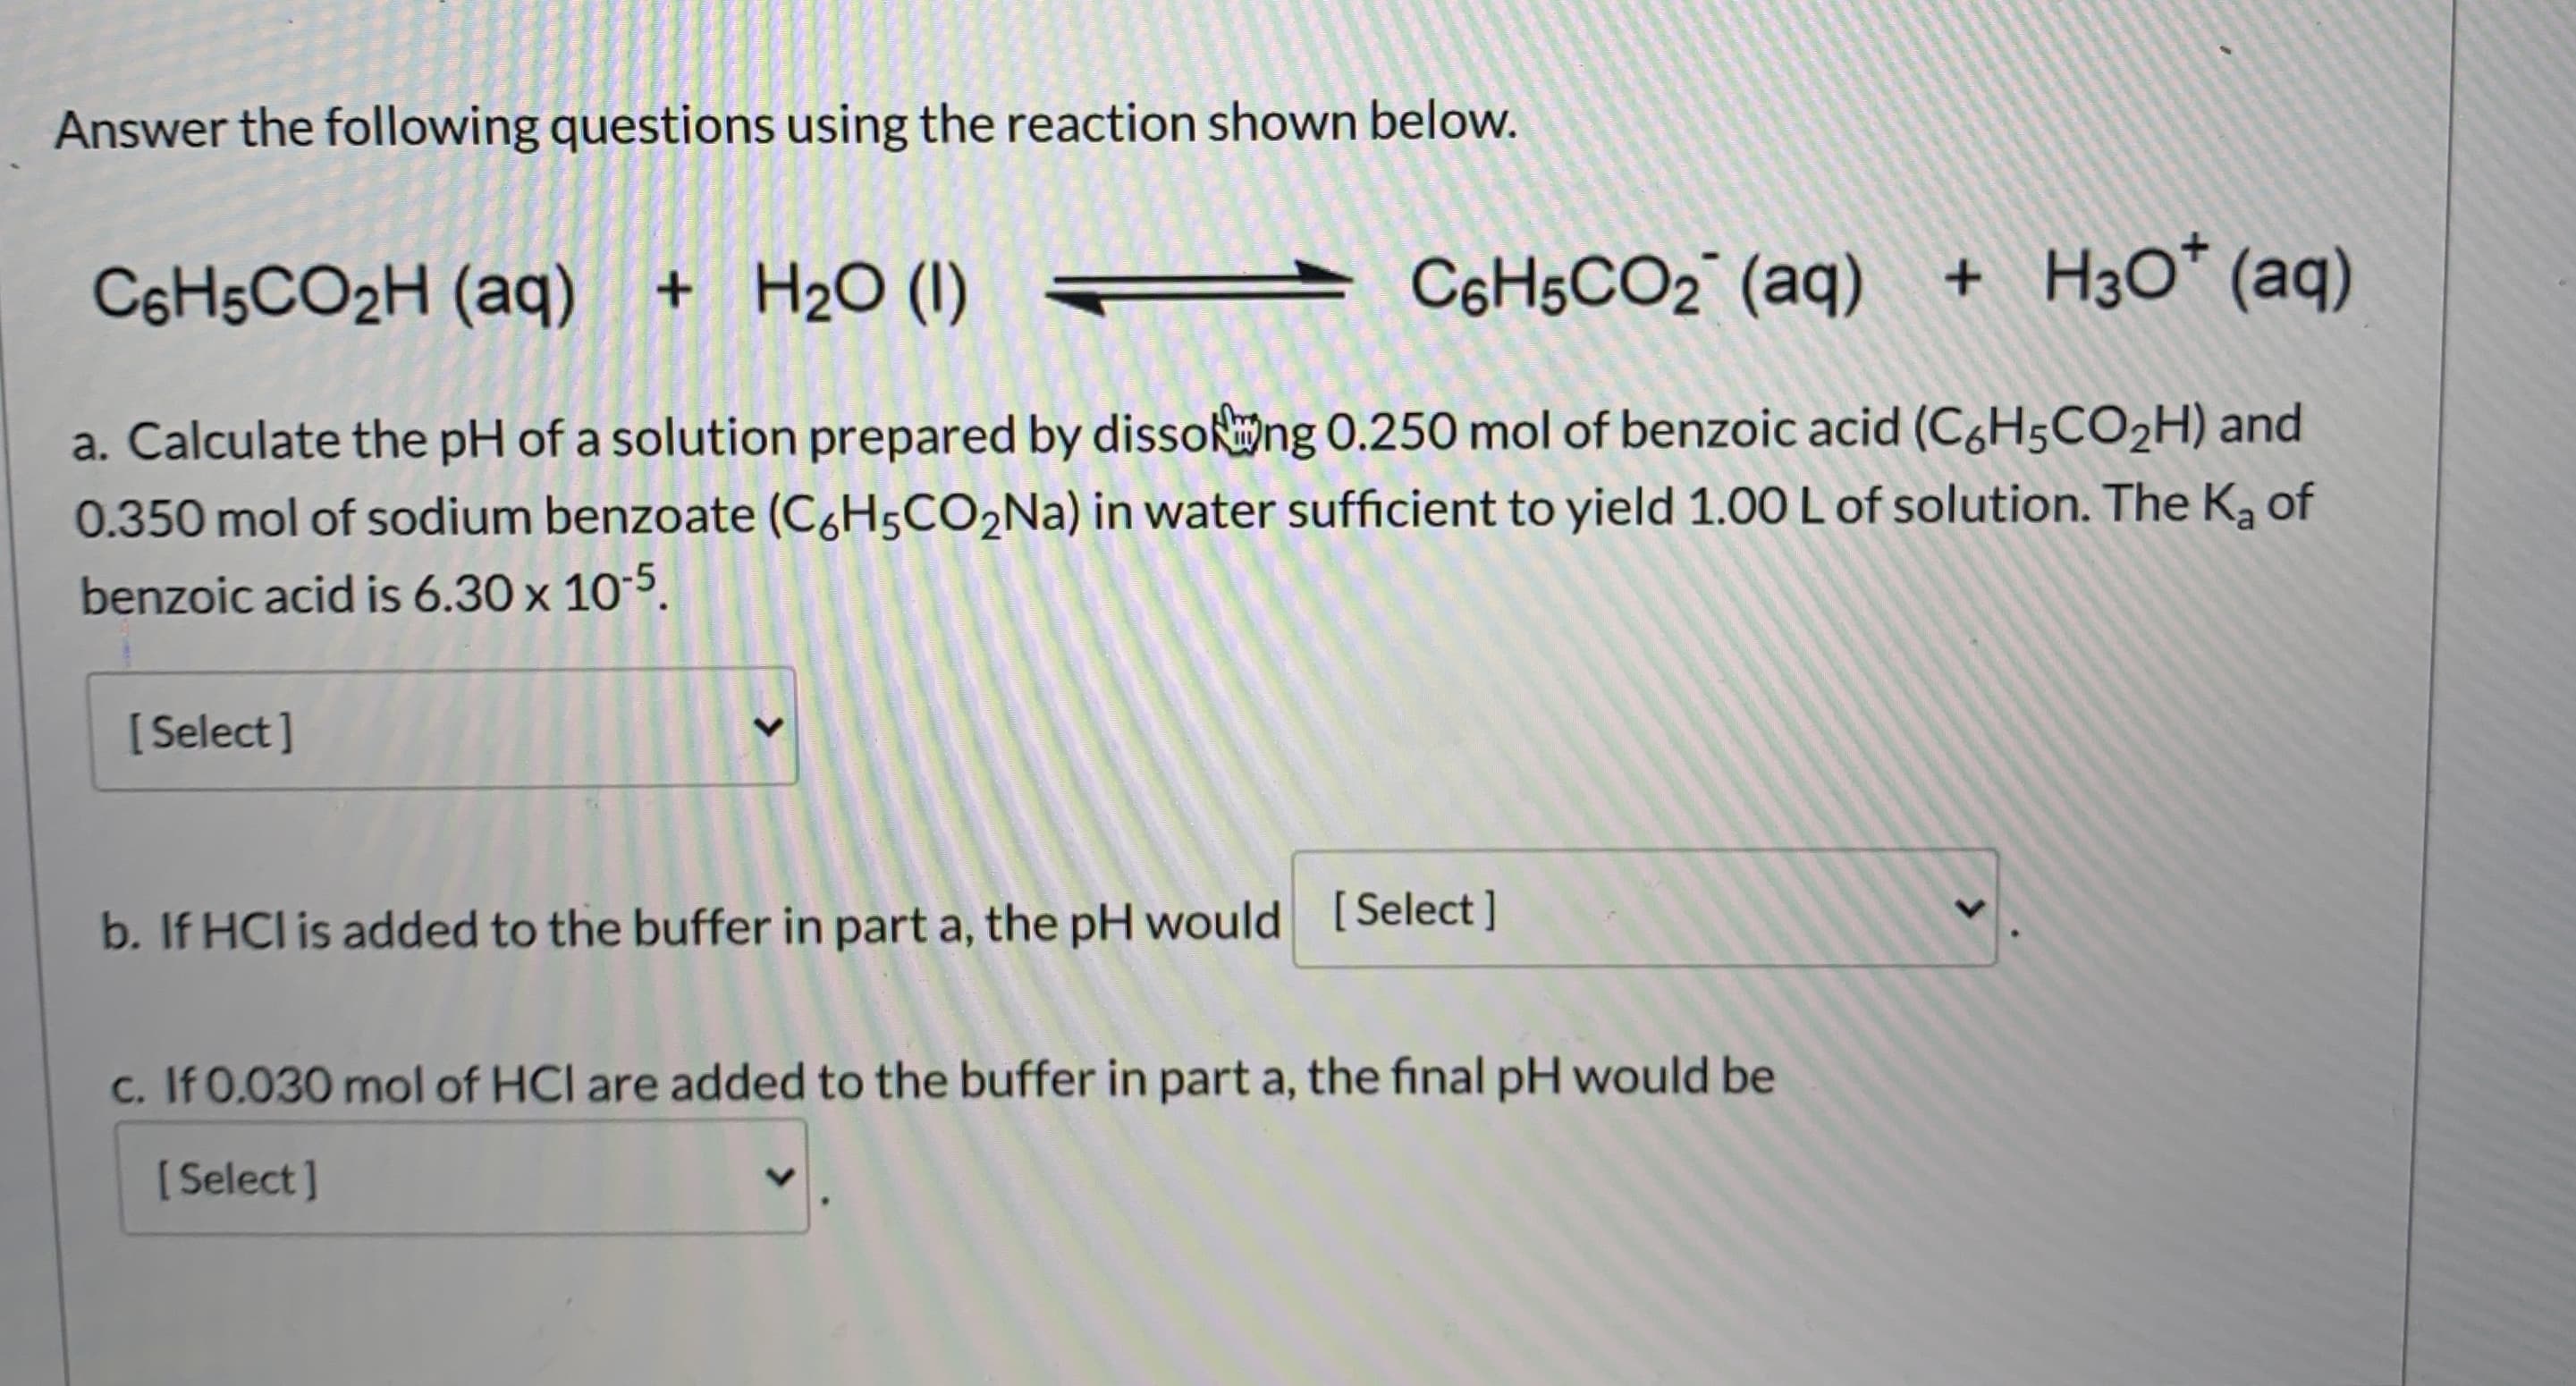 Answer the following questions using the reaction shown below.
C6H5CO2H (aq)
+ H2O (I)
C6H5CO2 (aq)
+ H3O* (aq)
a. Calculate the pH of a solution prepared by dissong 0.250 mol of benzoic acid (C6H5CO2H) and
0.350 mol of sodium benzoate (C&H5CO2NA) in water sufficient to yield 1.0O L of solution. The K, of
benzoic acid is 6.30 x 10-5.
[ Select]
b. If HCl is added to the buffer in part a, the pH would [Select ]
c. If 0.030 mol of HCI are added to the buffer in part a, the final pH would be
[ Select]
